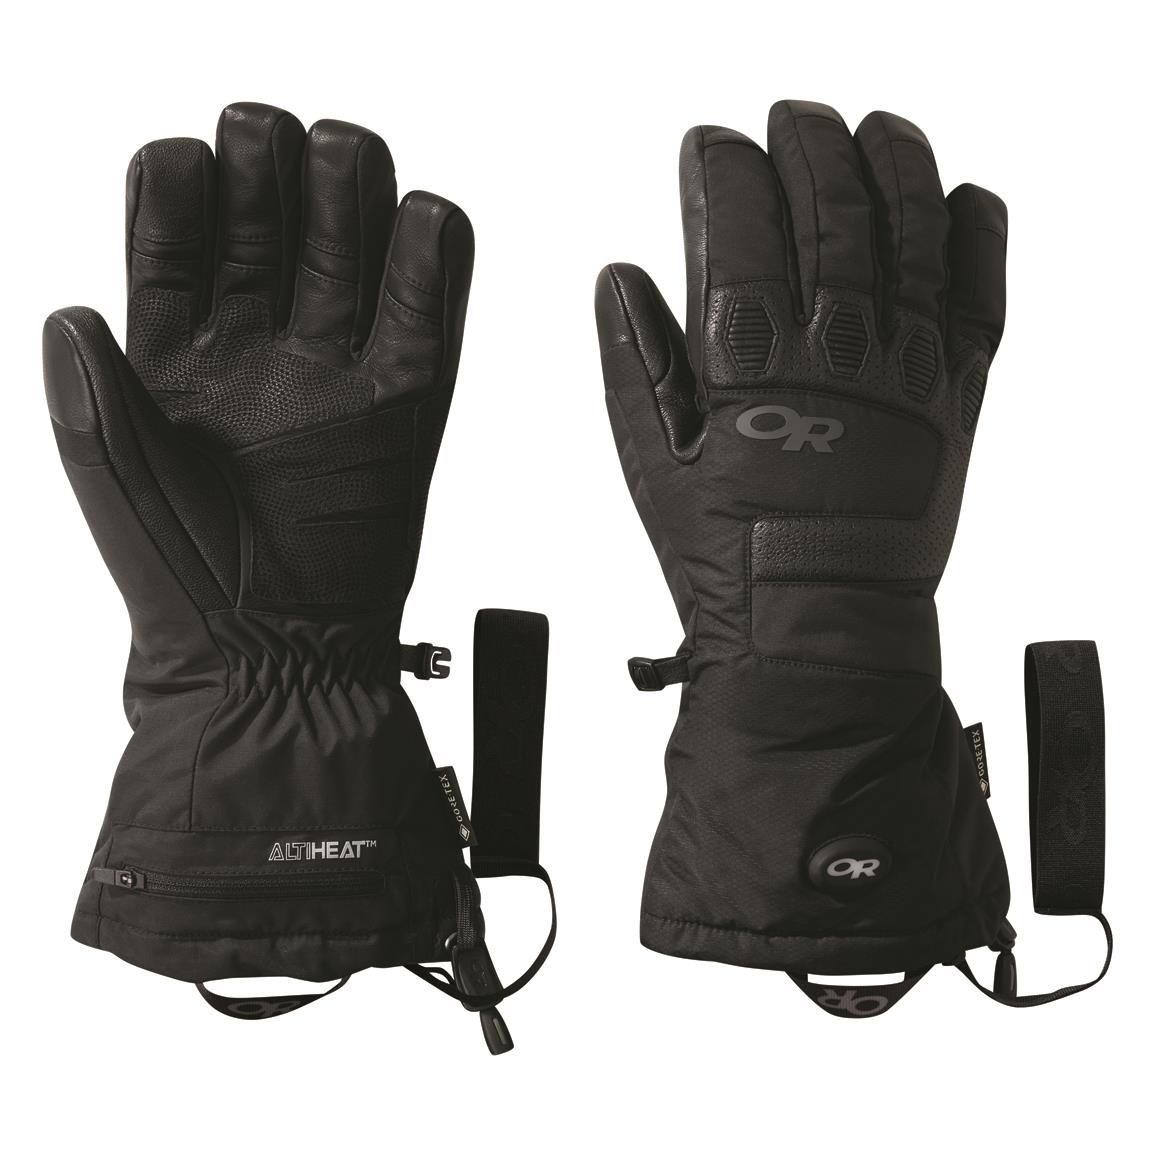 Outdoor Research Lucent Heated Waterproof Insulated Gloves, GORE-TEX, Black